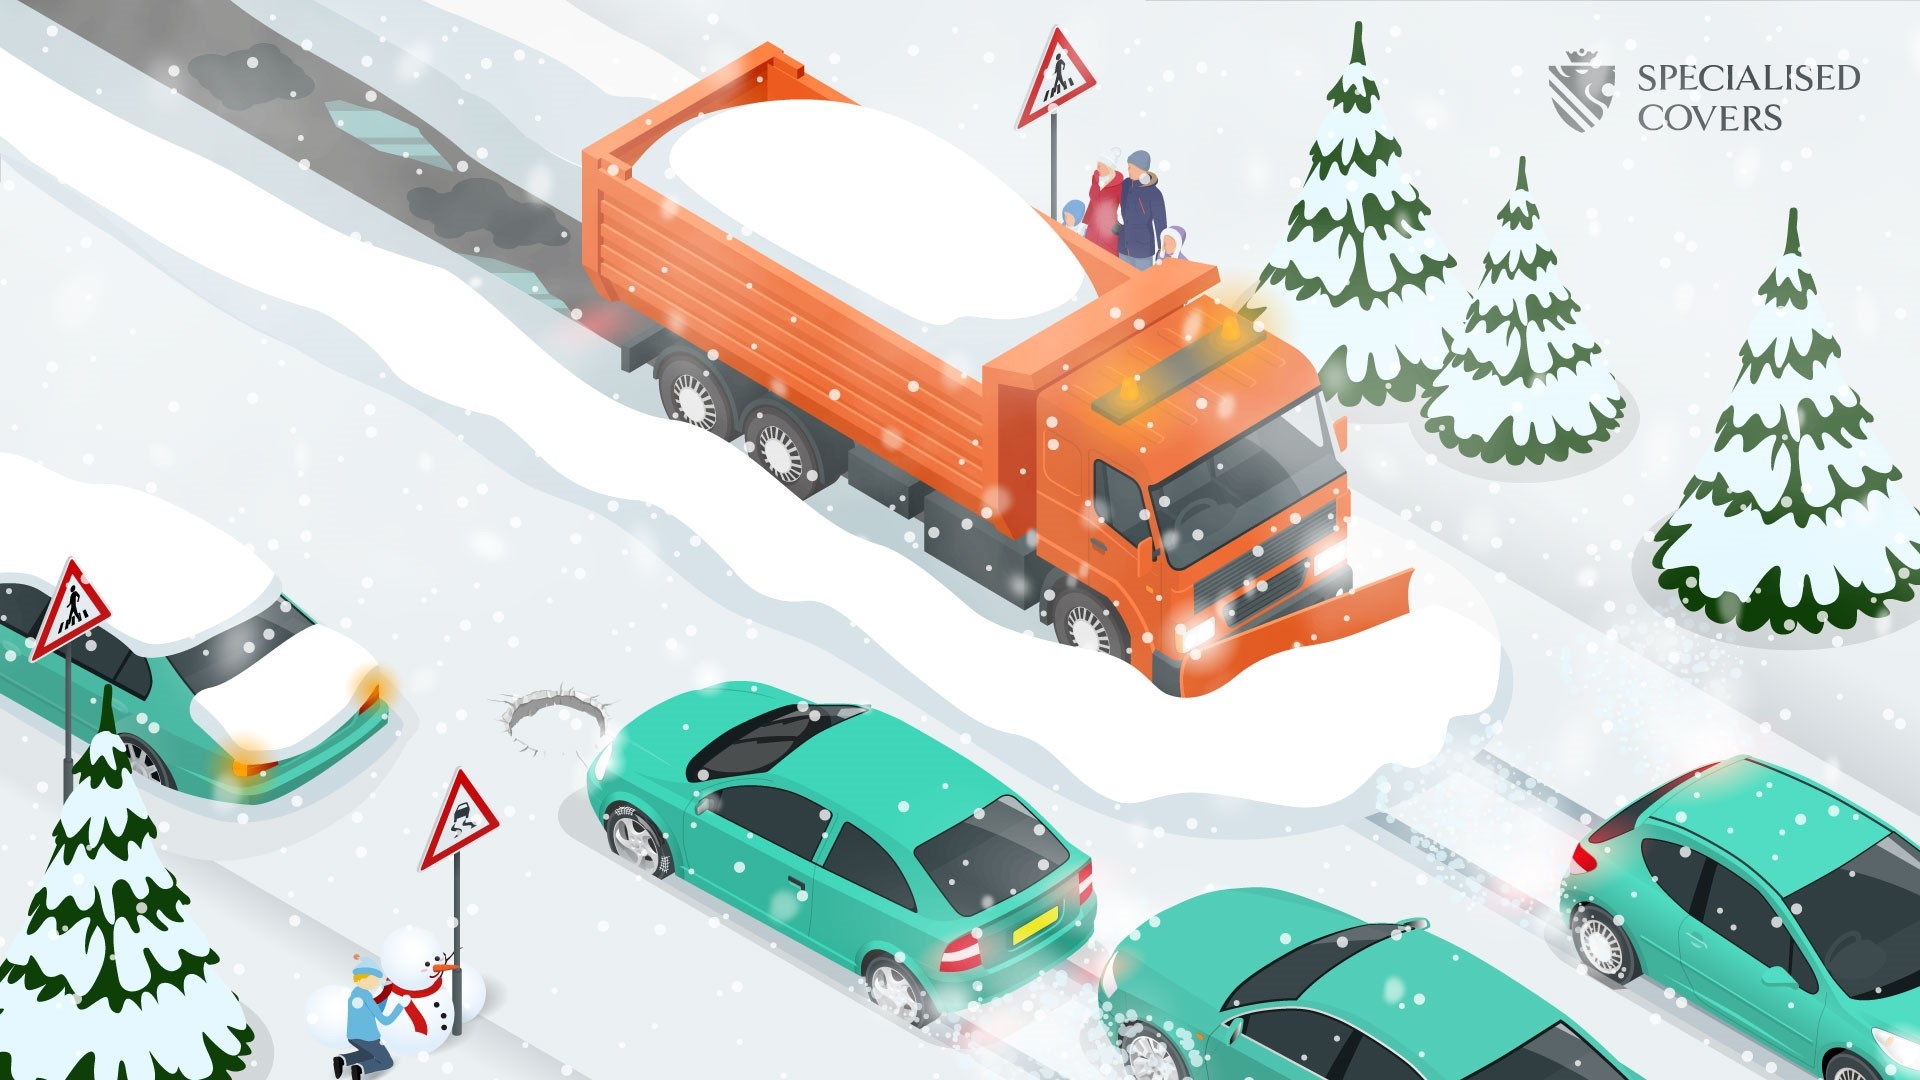 Click to read Winter driving – how many hazards can you spot? 